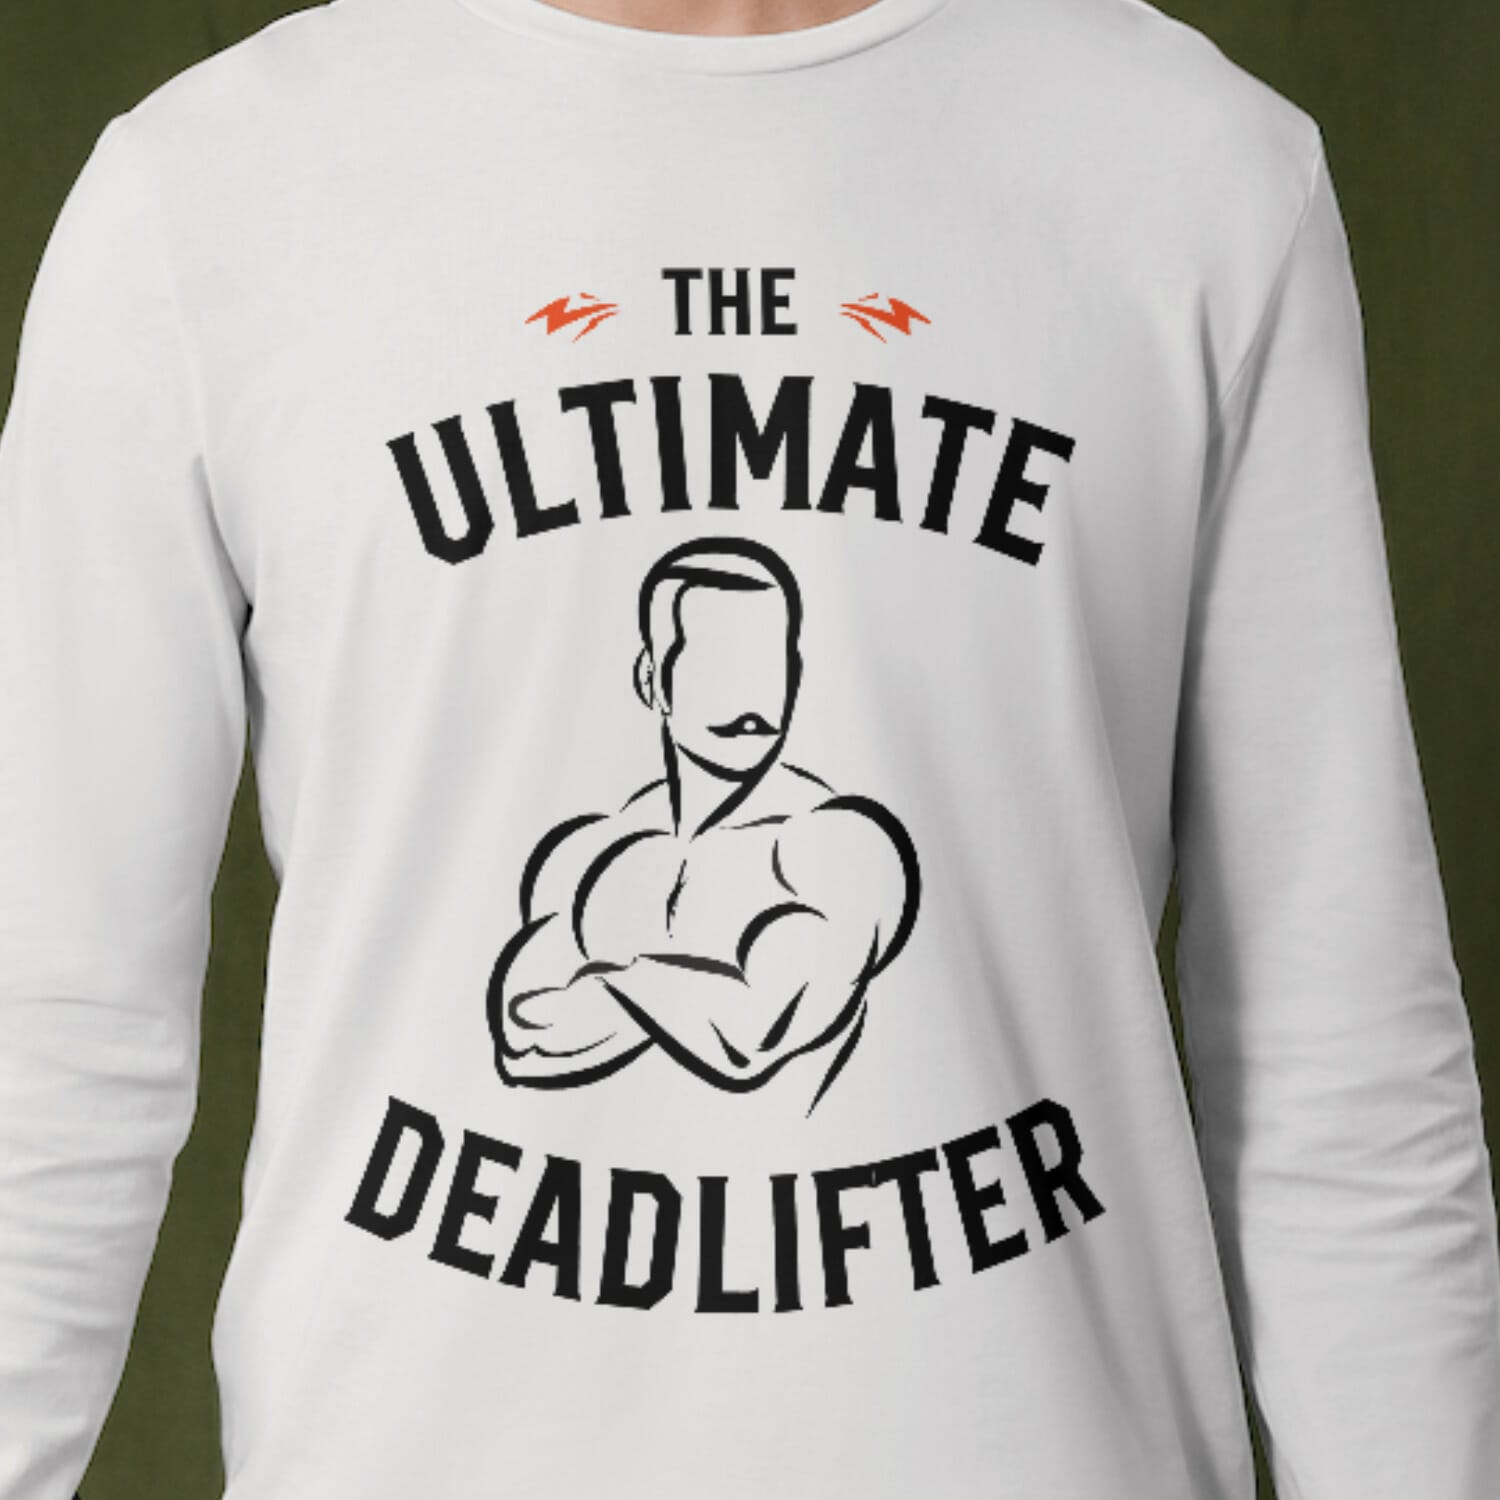 Free Design For T Shirt The Ultimate Deadlifter